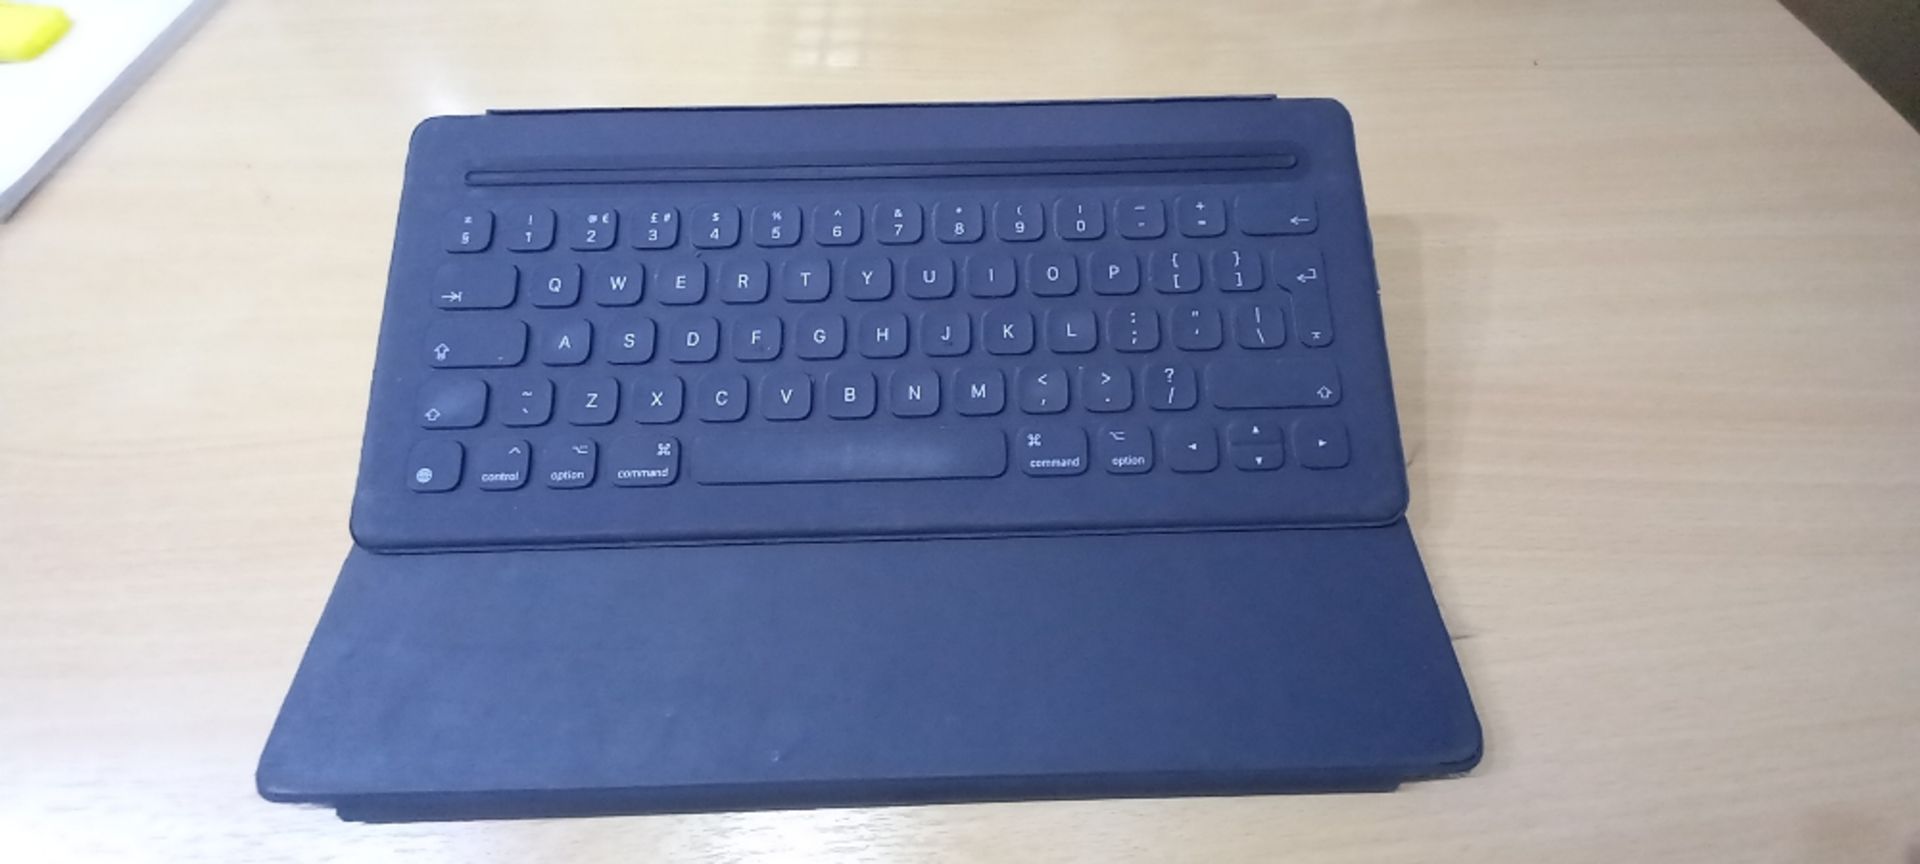 Apple iPad Pro A1652 WIFI + Cellular with Smart Keyboard Case - Image 4 of 4